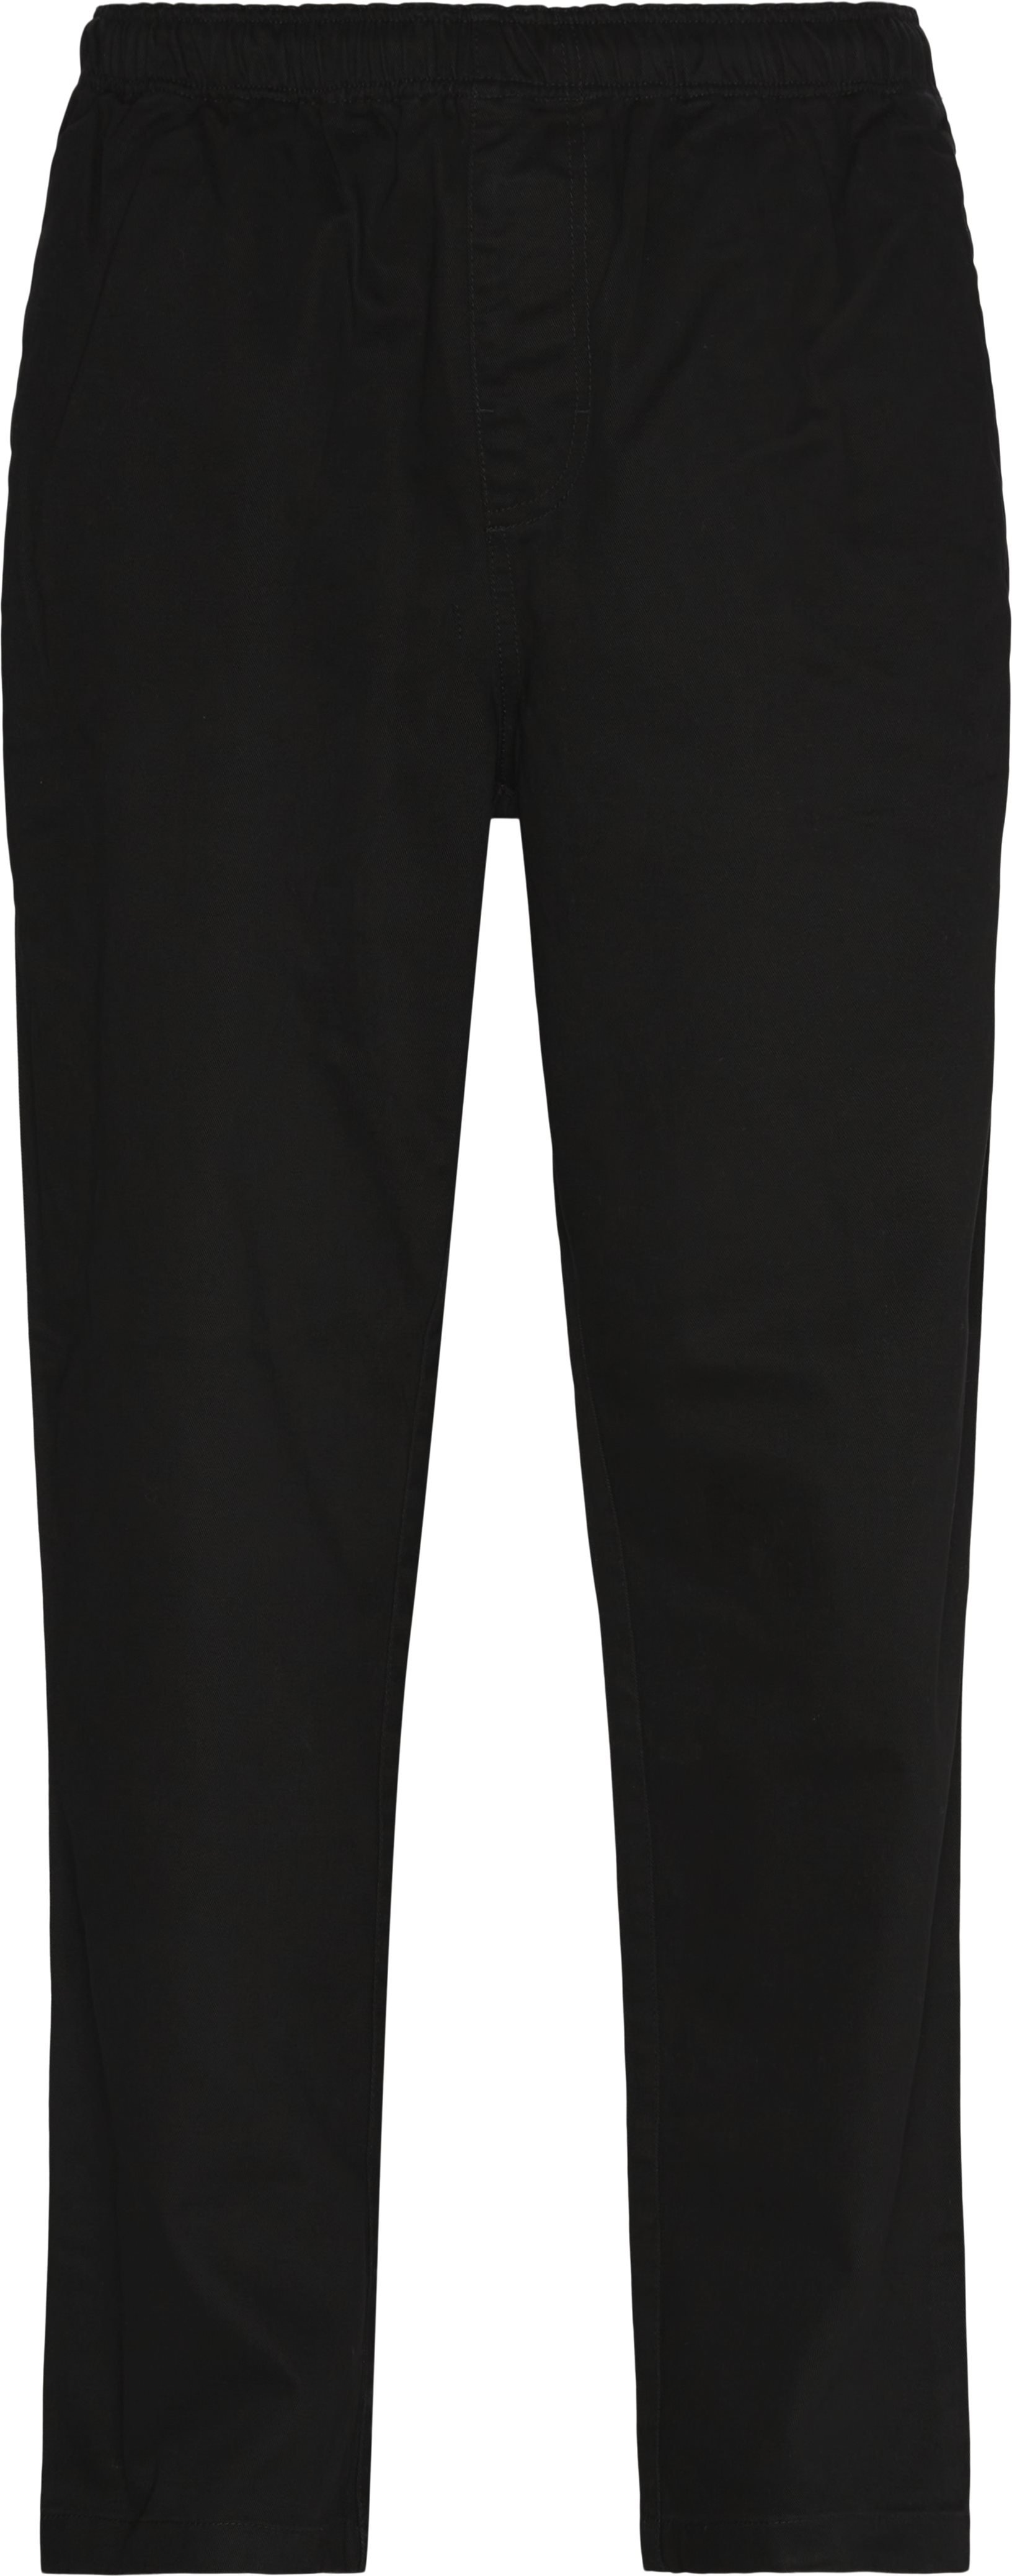 Brushed Beach Pant - Trousers - Loose fit - Black